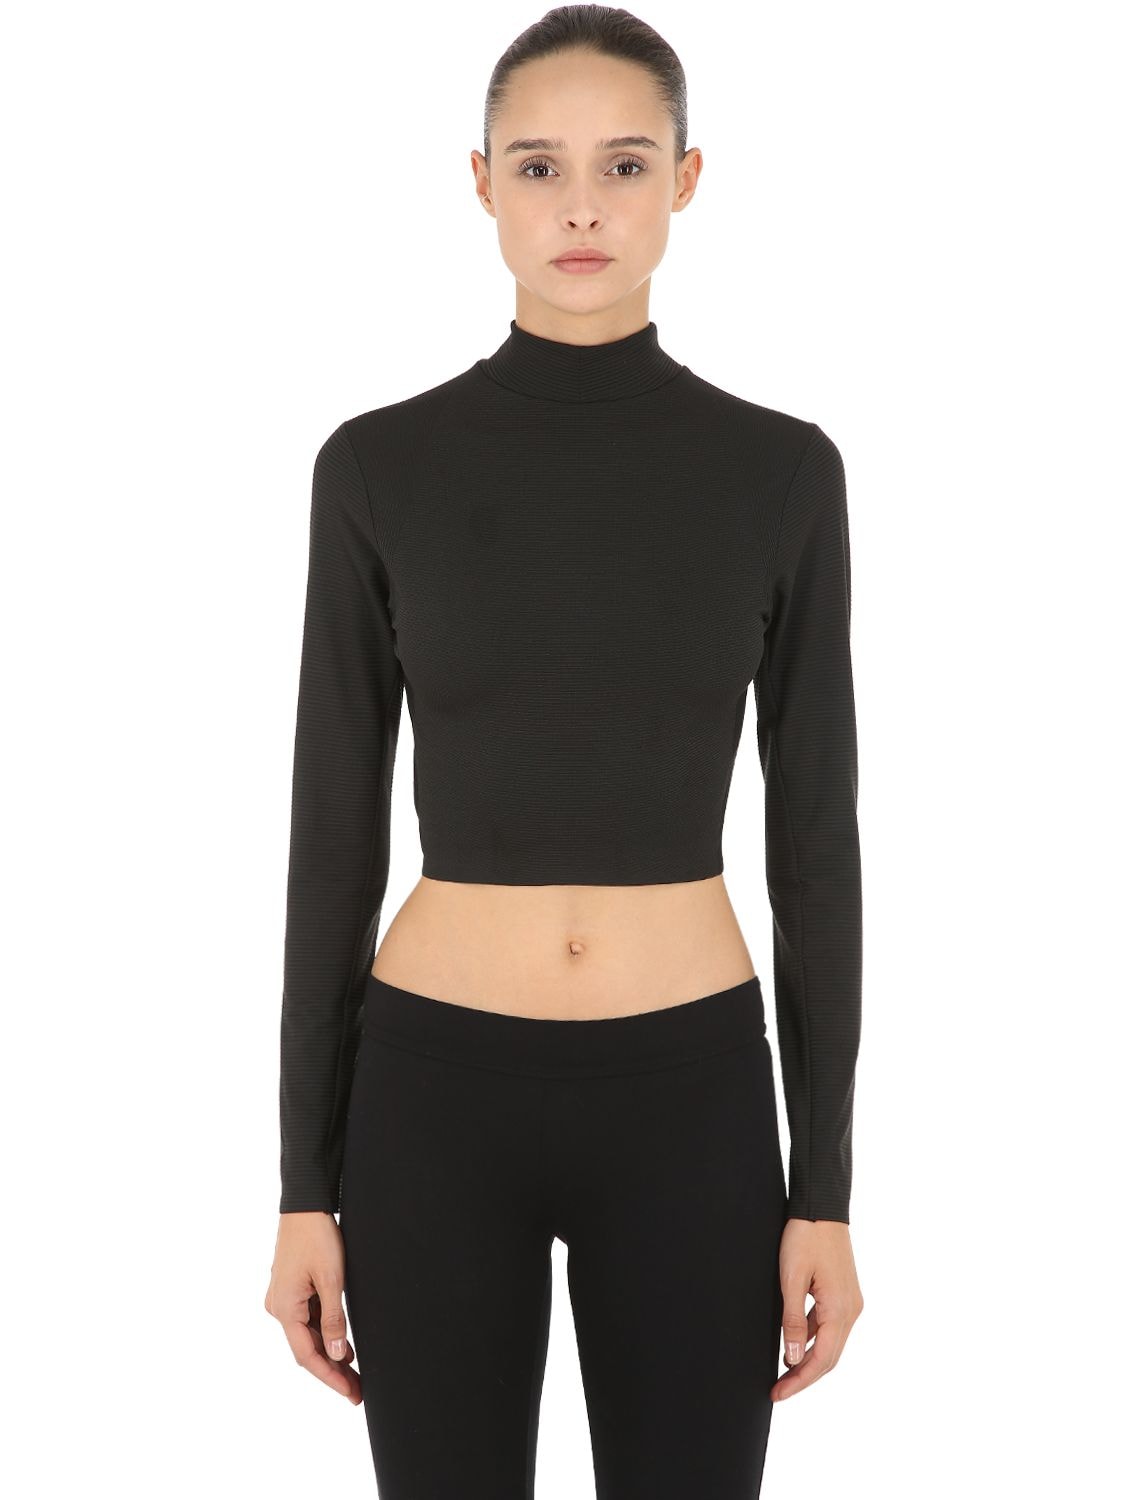 Nrg Nwcc Eng Cropped Top